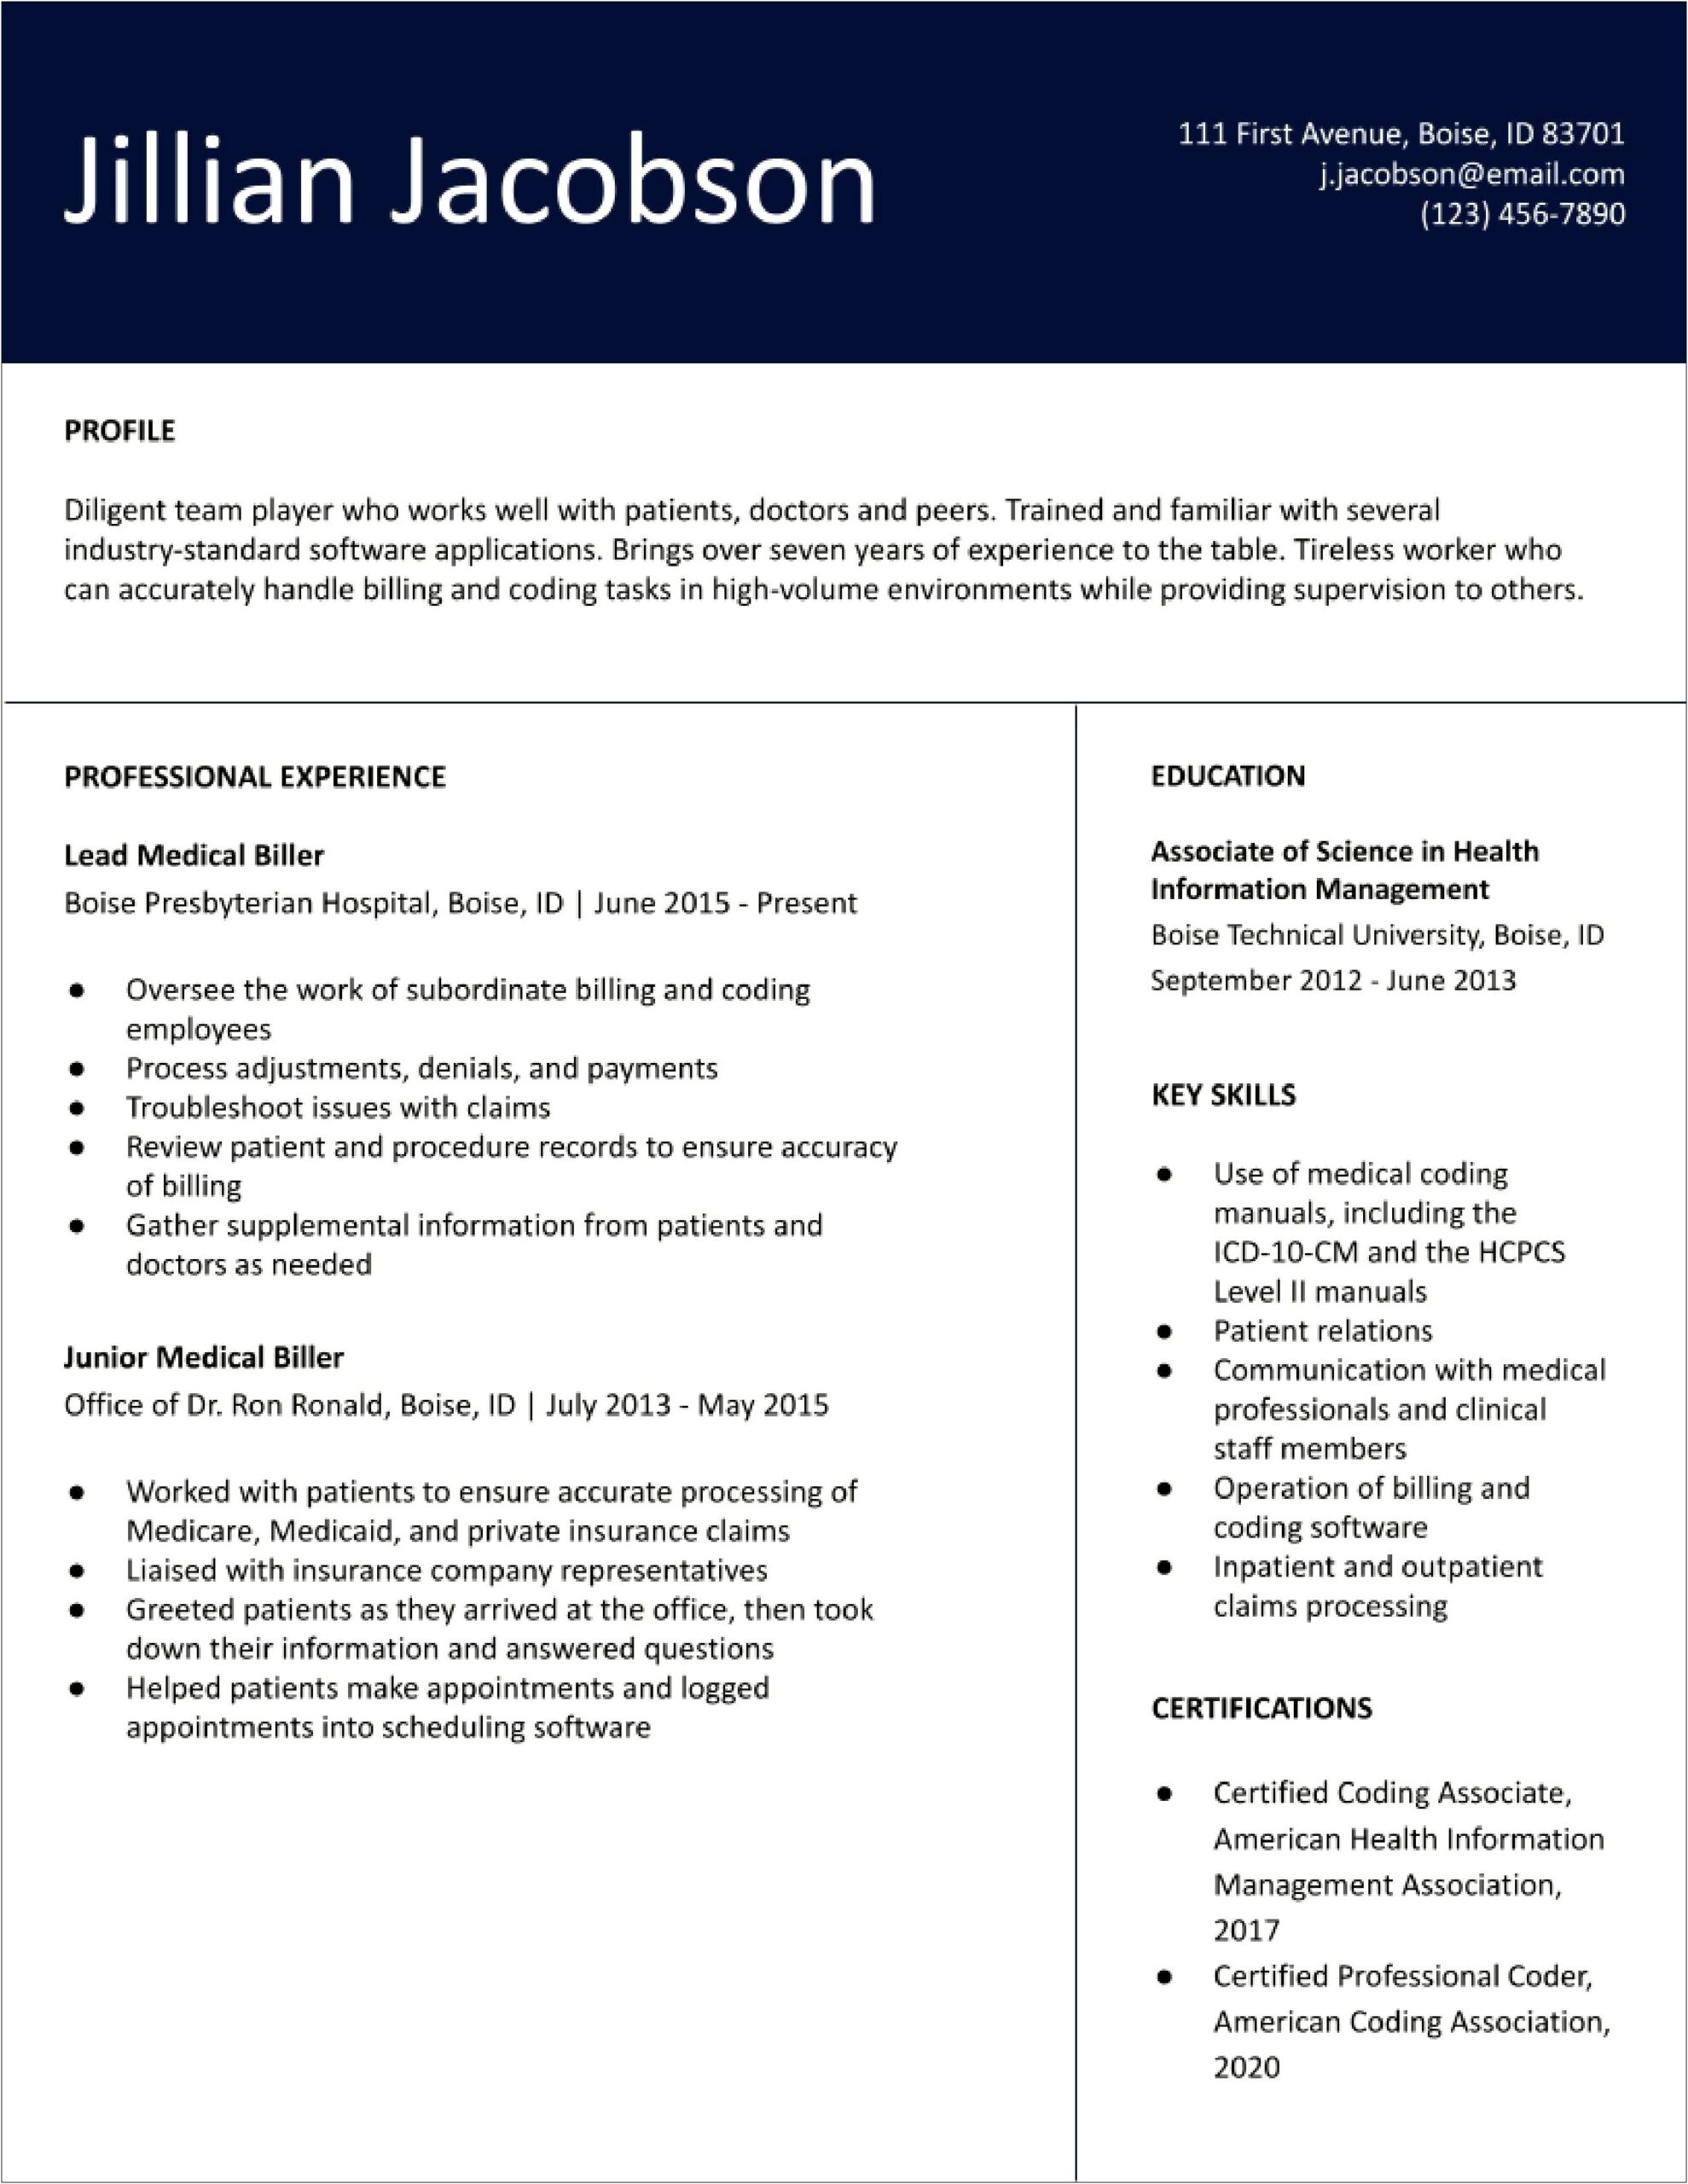 Certified Professional Coder Resume Examples